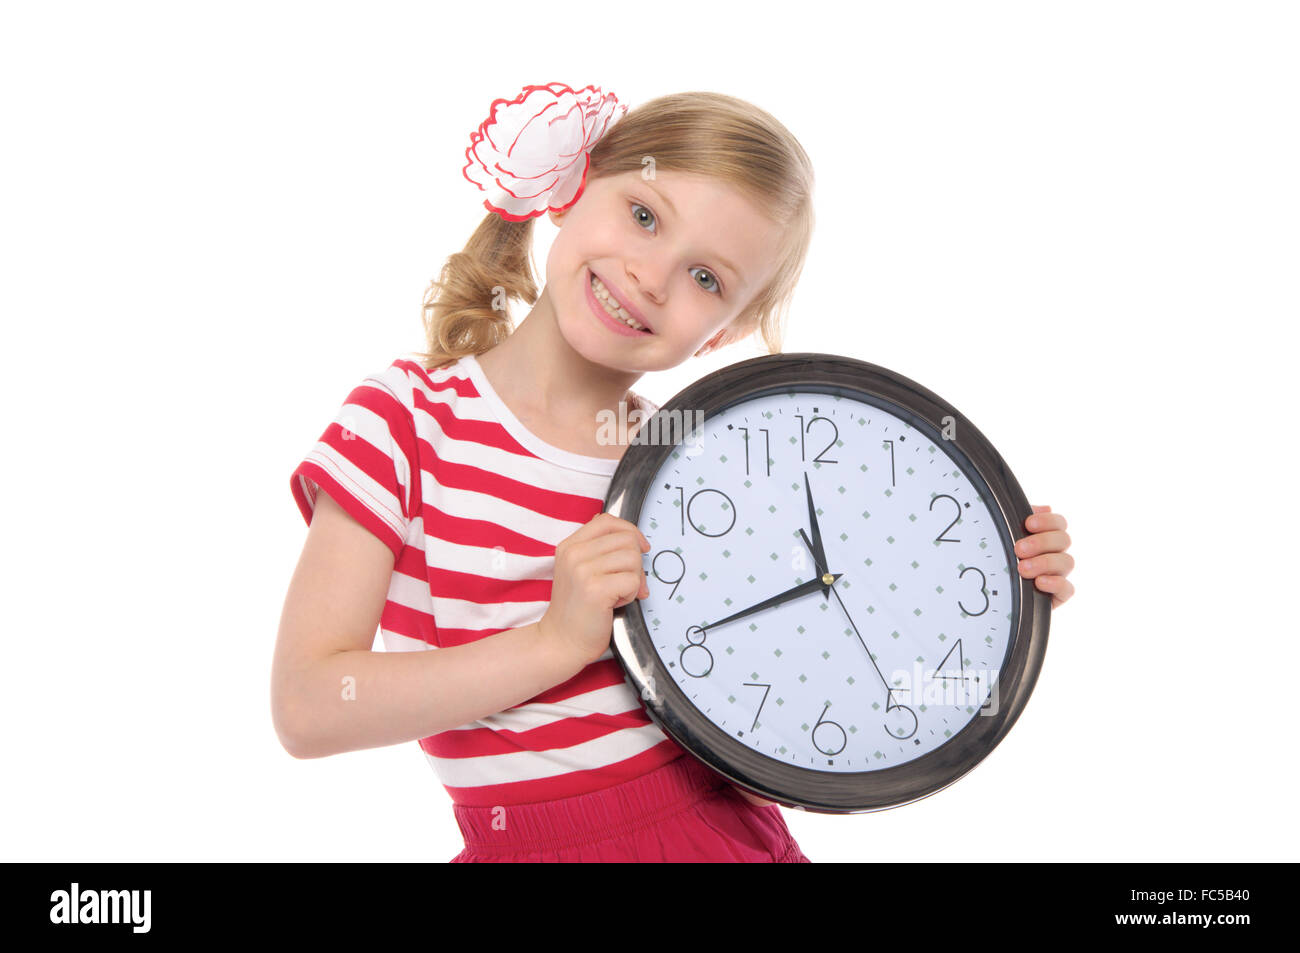 smiling girl with clock Stock Photo